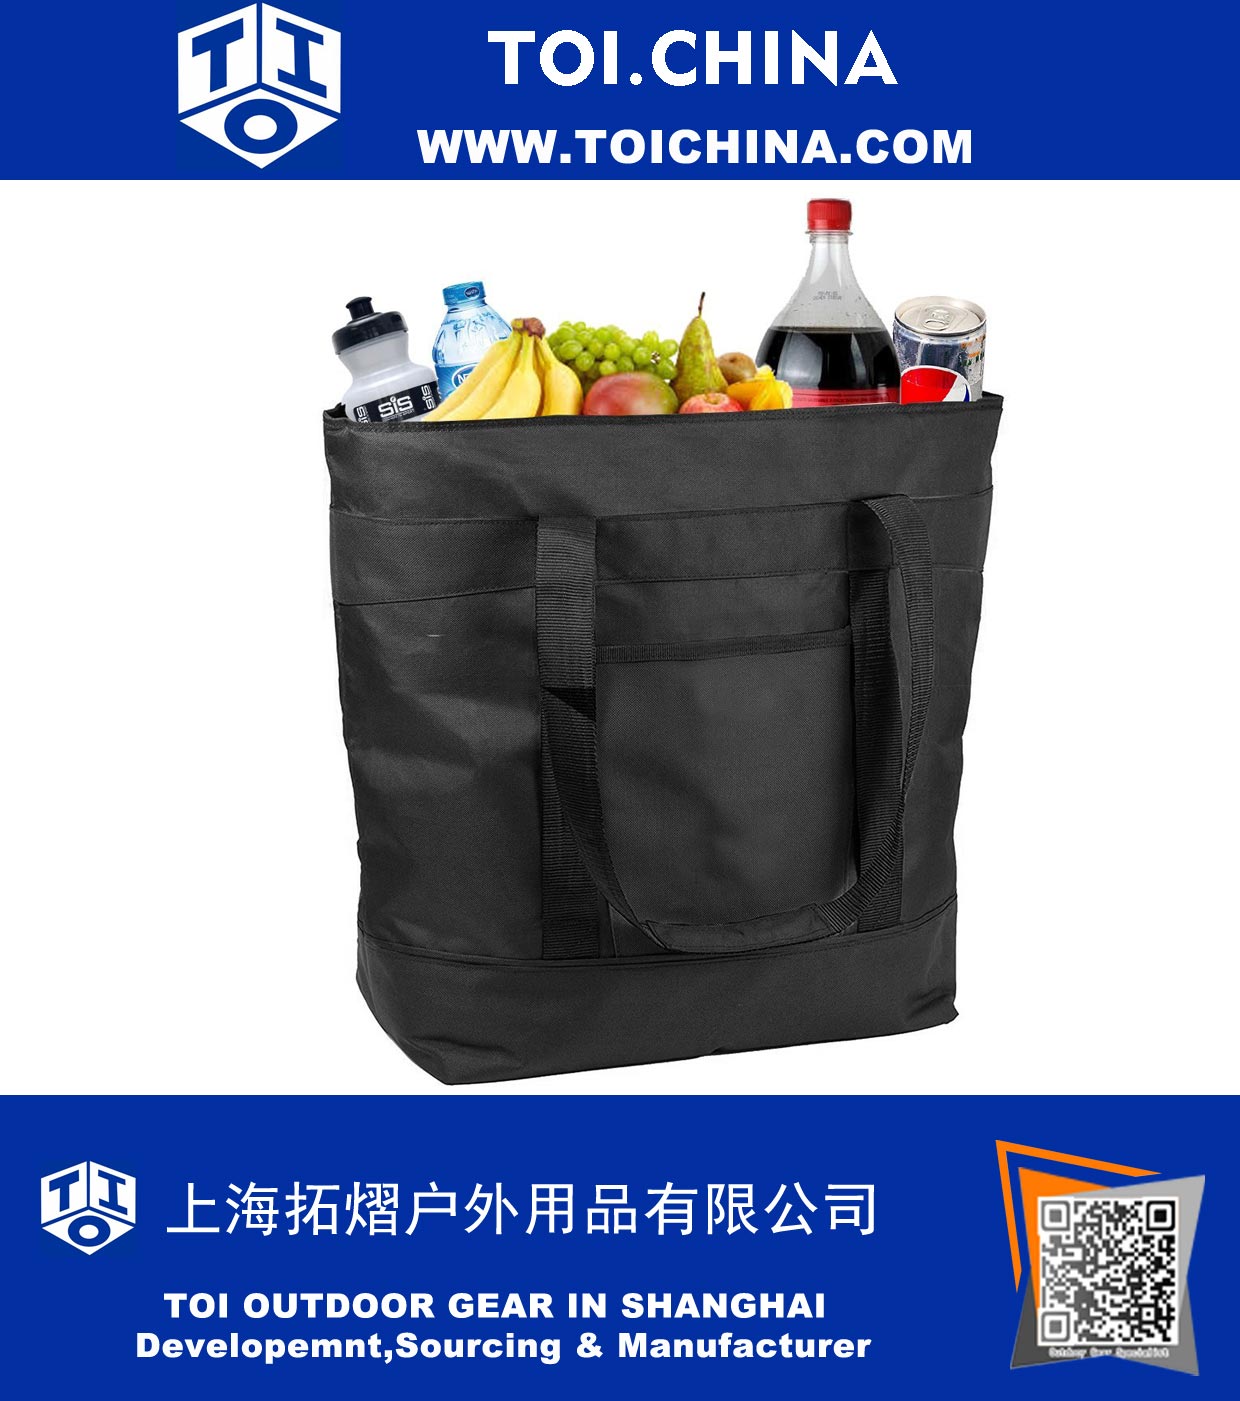 Insulated Grocery Bag